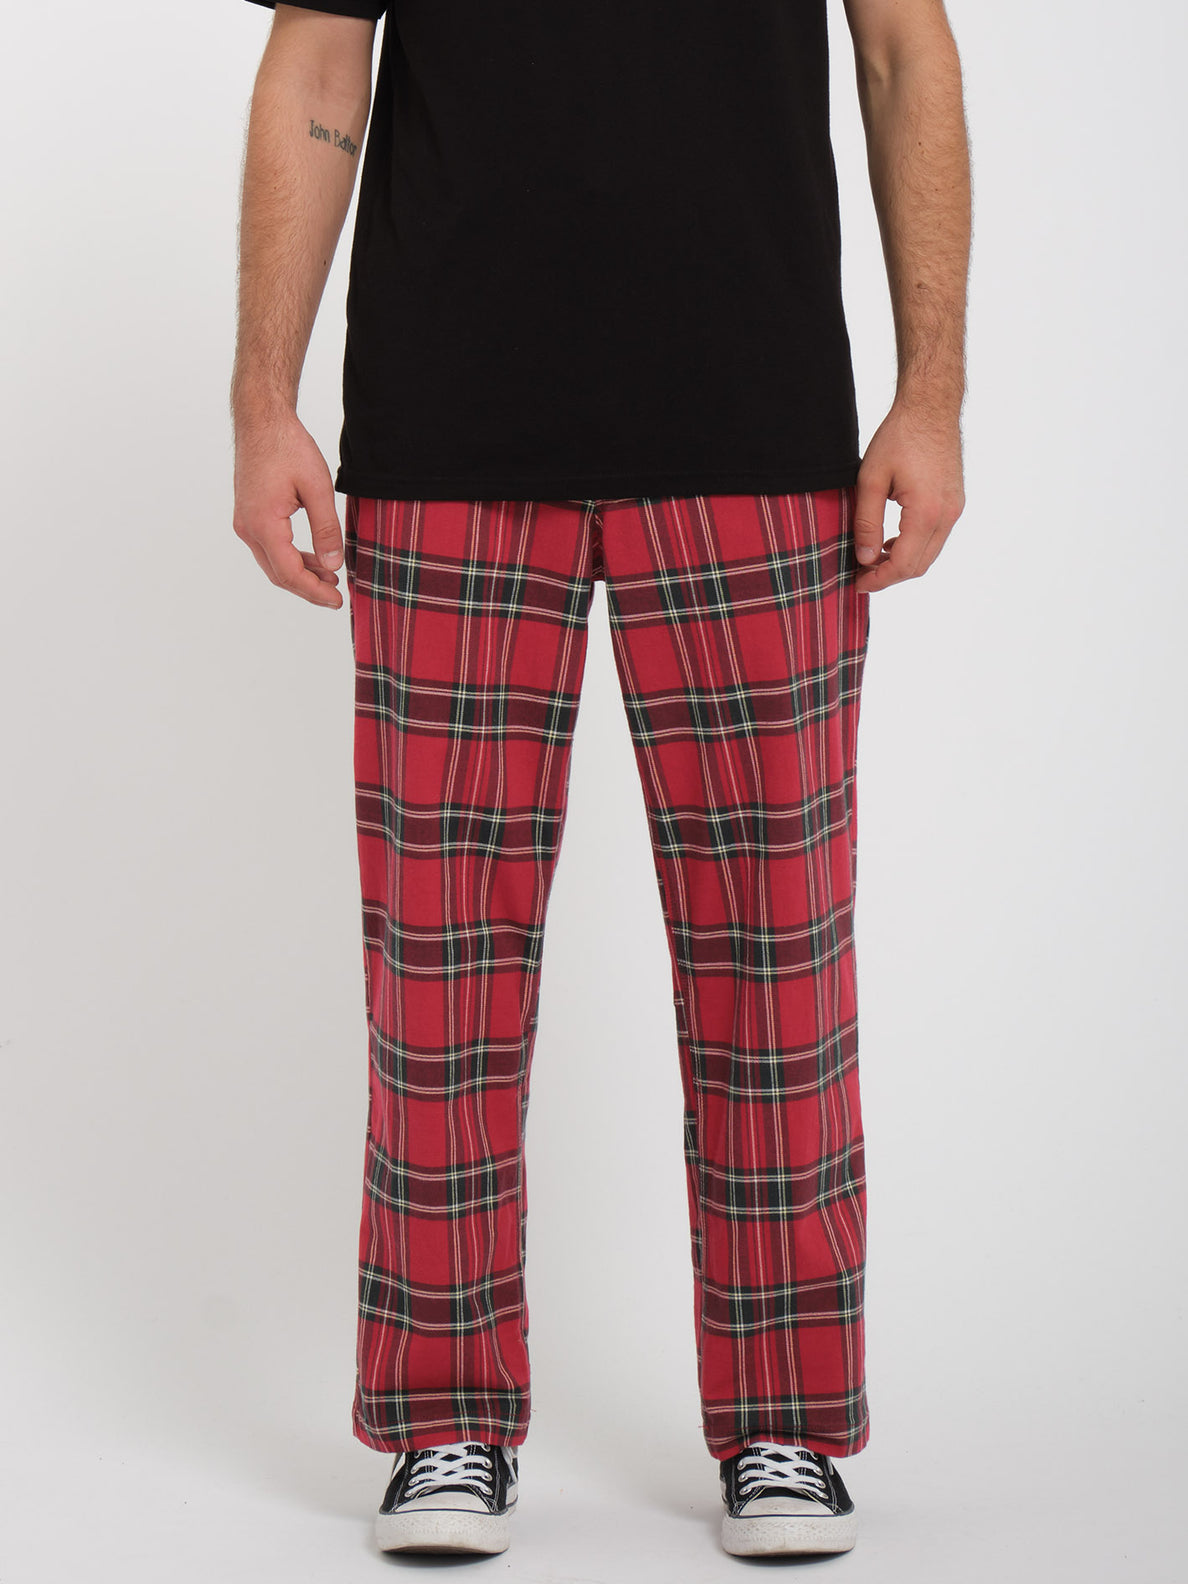 Gray Burgundy Plaid Trousers For Men: Comfort And Style Combined